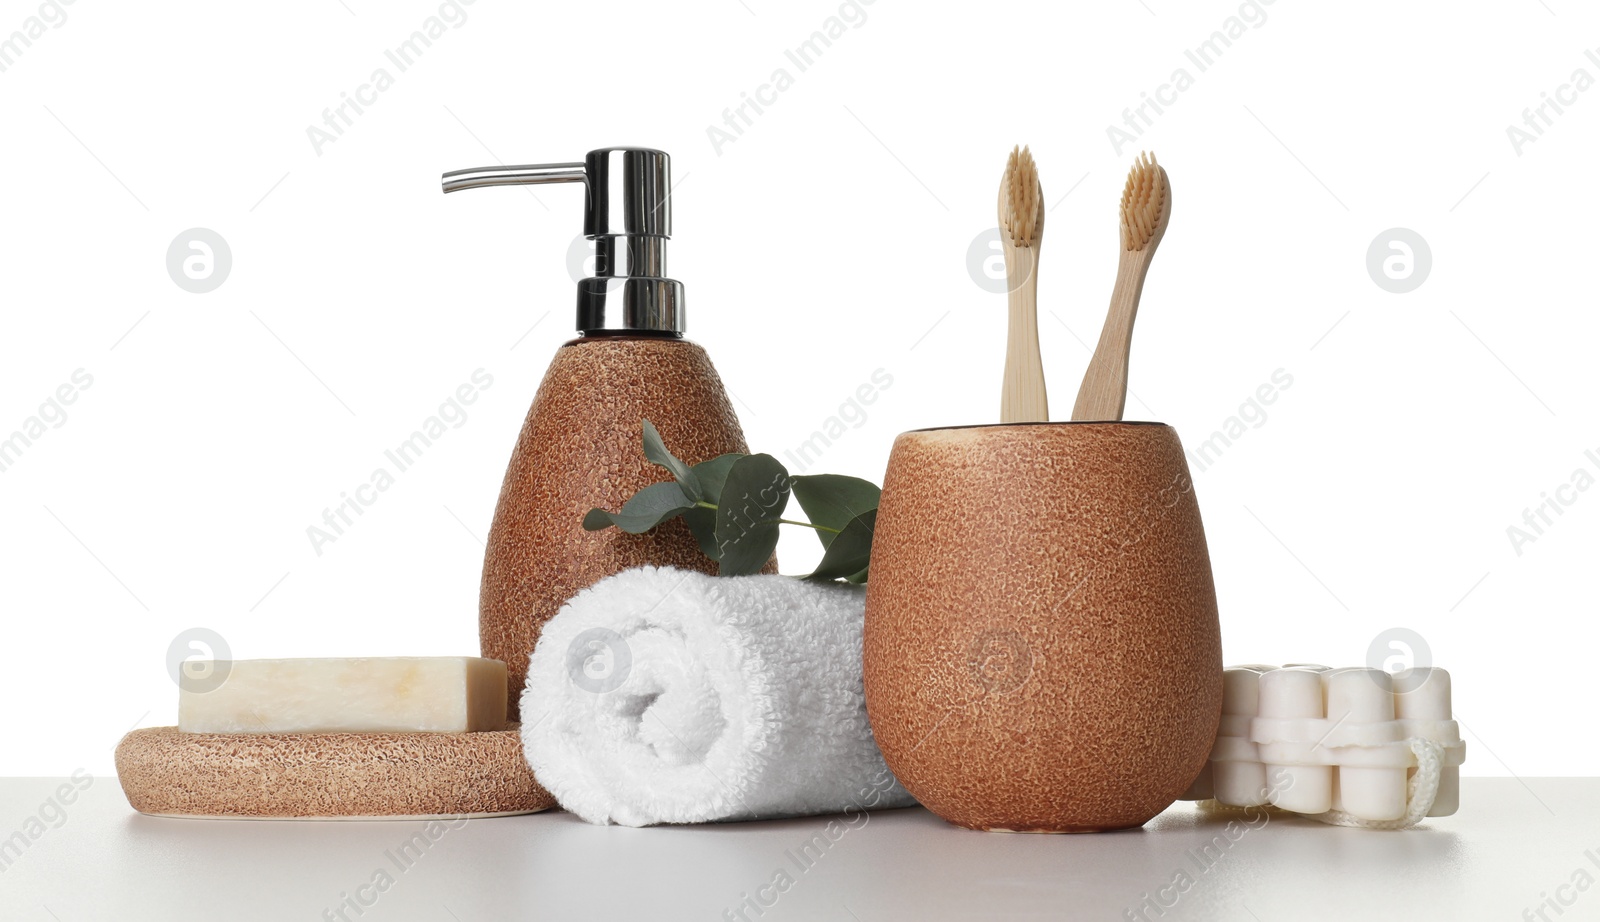 Photo of Bath accessories. Different personal care products and eucalyptus branch on table against white background